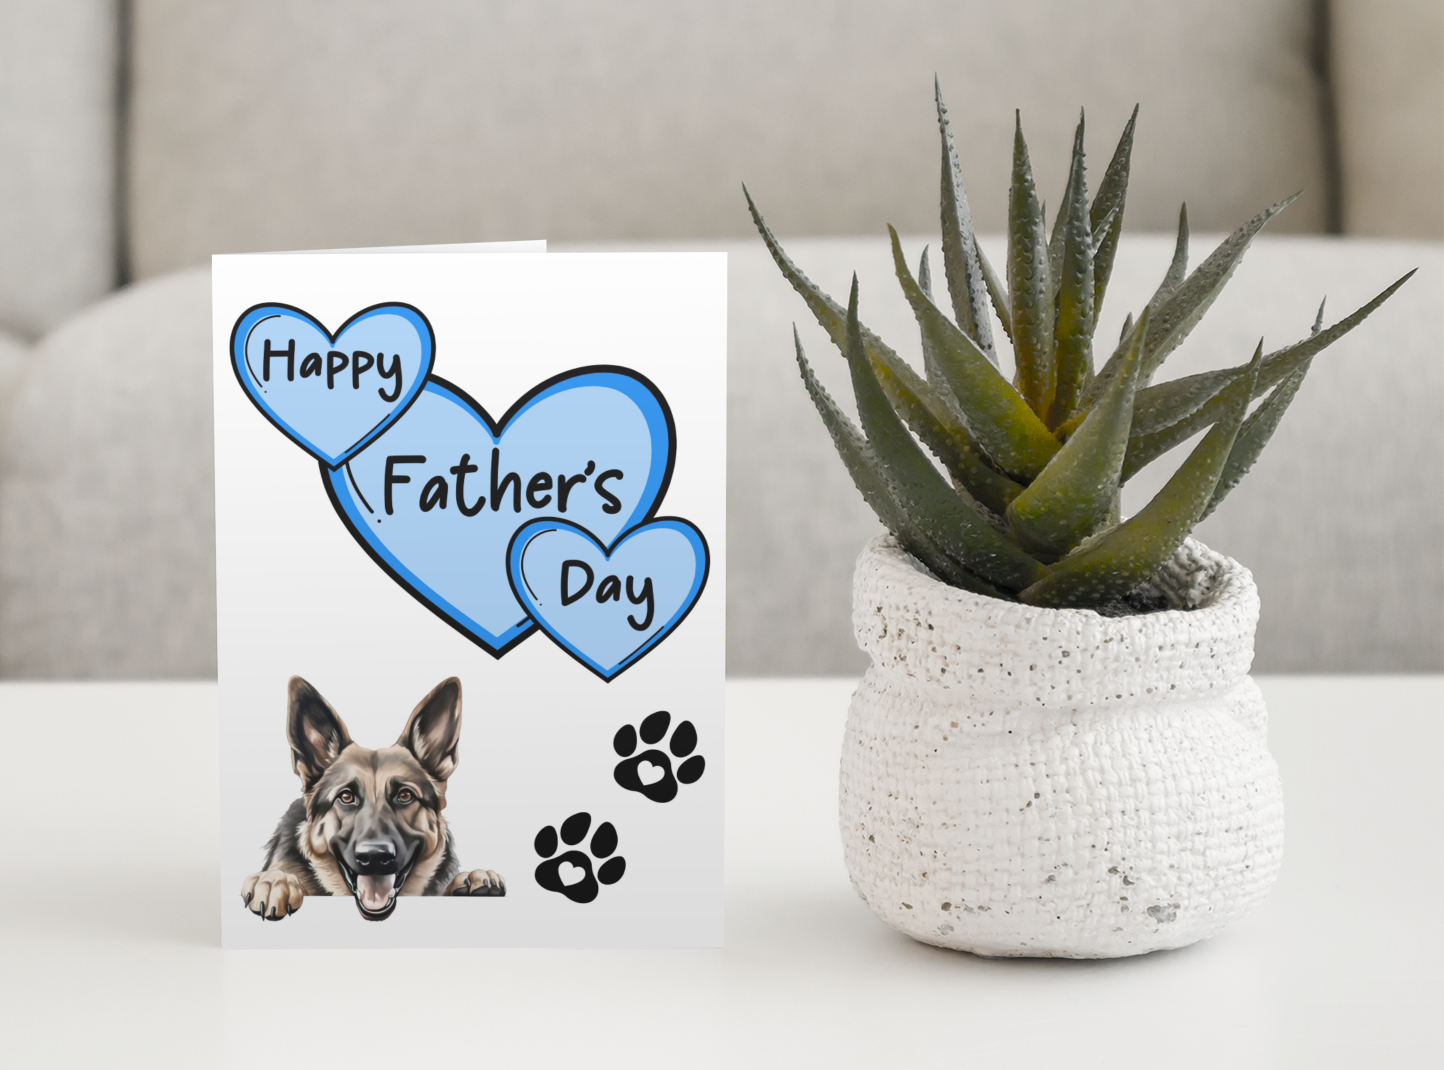 German Shepherd Father's Day Card - Nice Cute Fun Pet Dog Puppy Owner Novelty Greeting Card